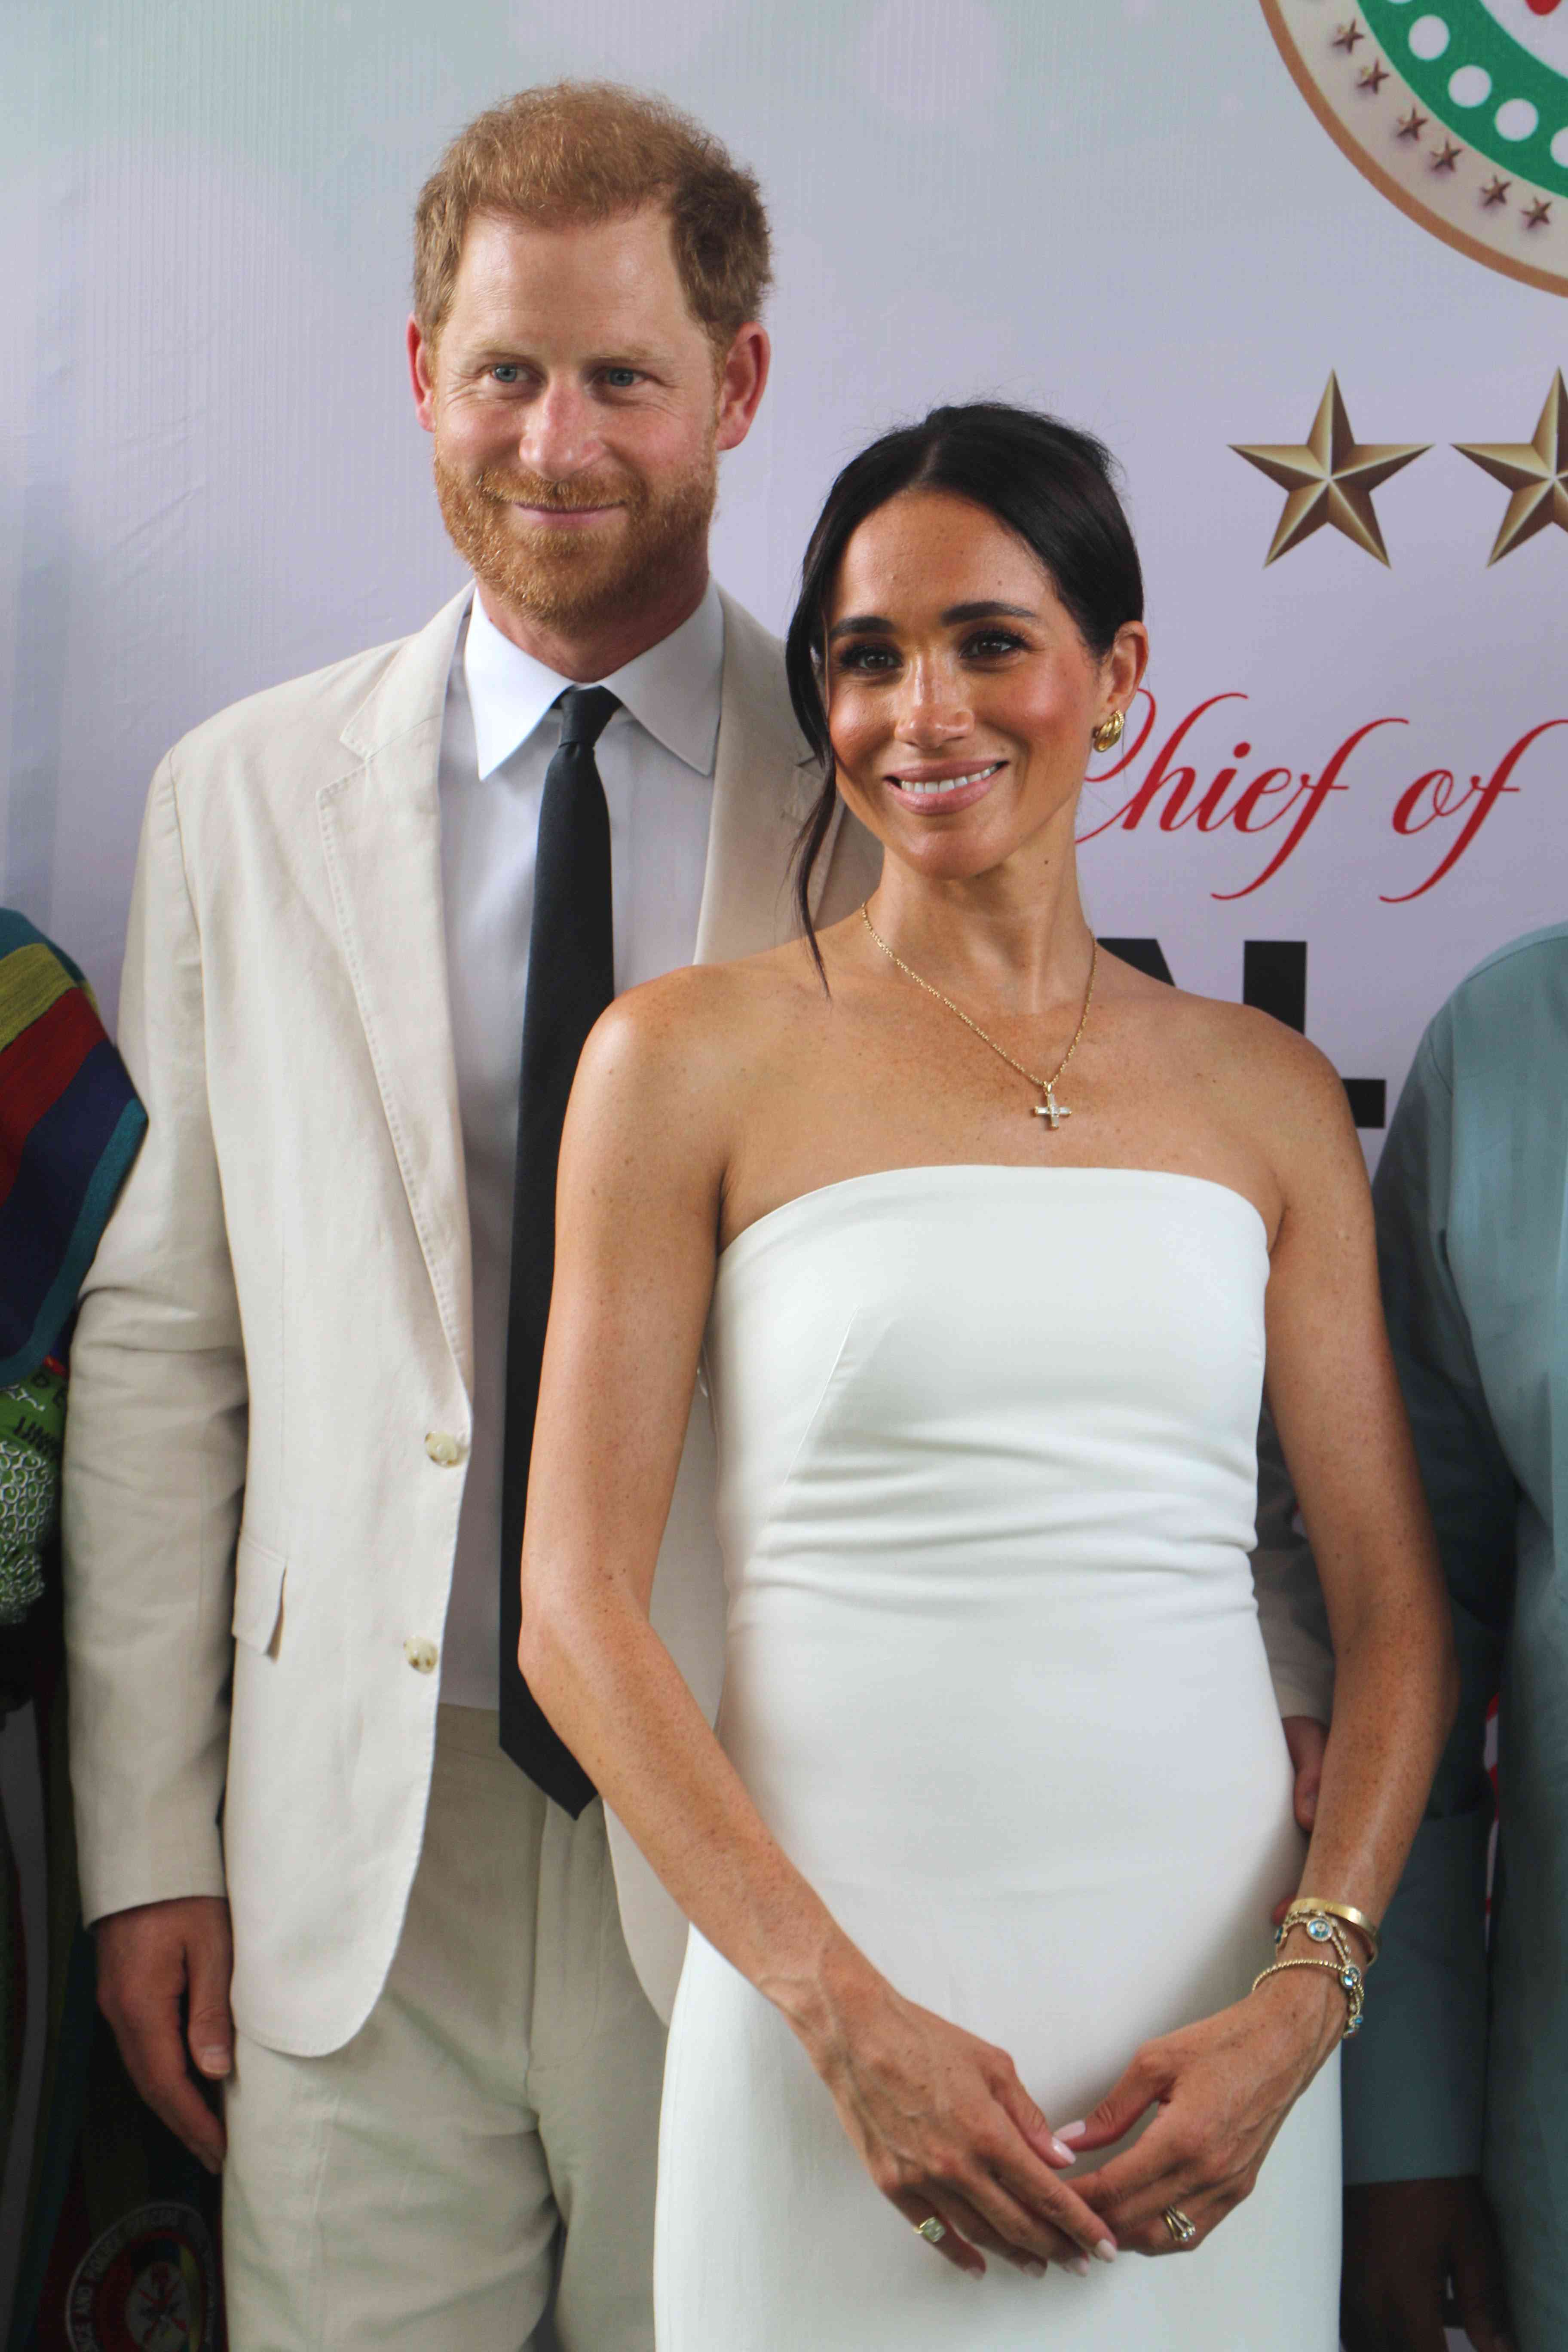 Prince Harry and Meghan Markle “Are Really Happy” After Their Nigeria Trip